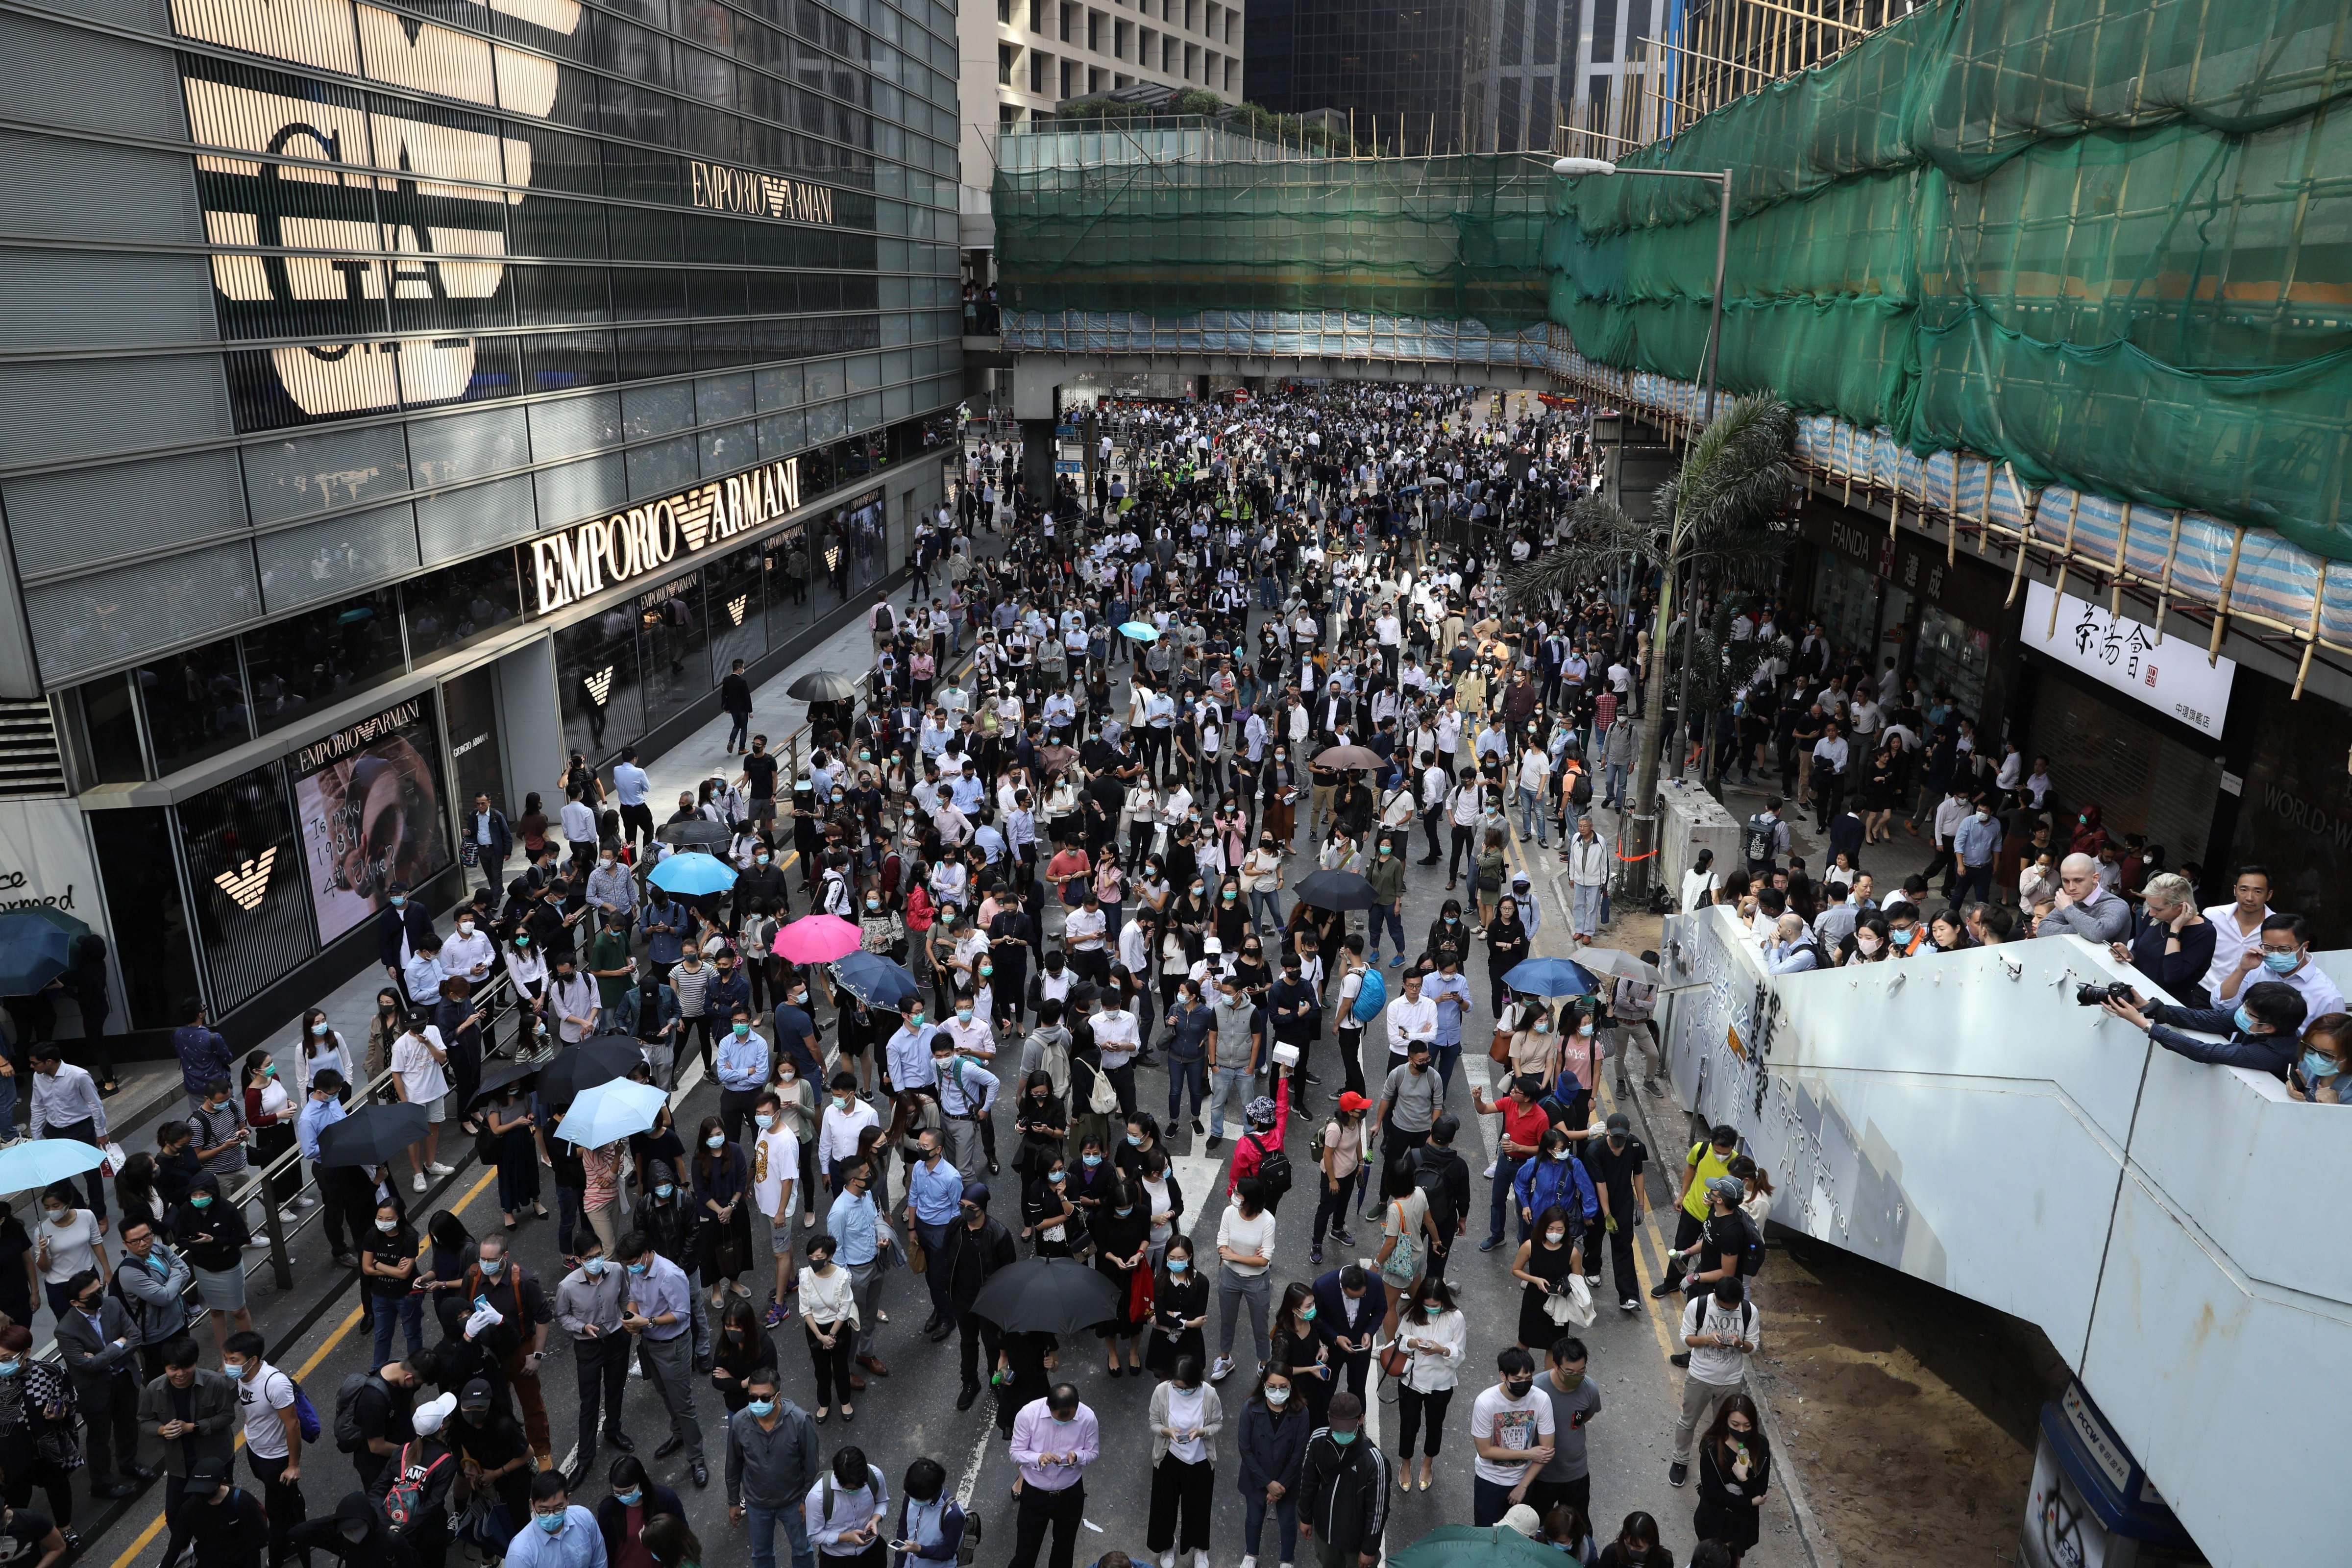 Protesters and office workers gather during a protest in the Central district of Hong Kong on November 13, 2019. (DALE DE LA REY—AFP via Getty Images)